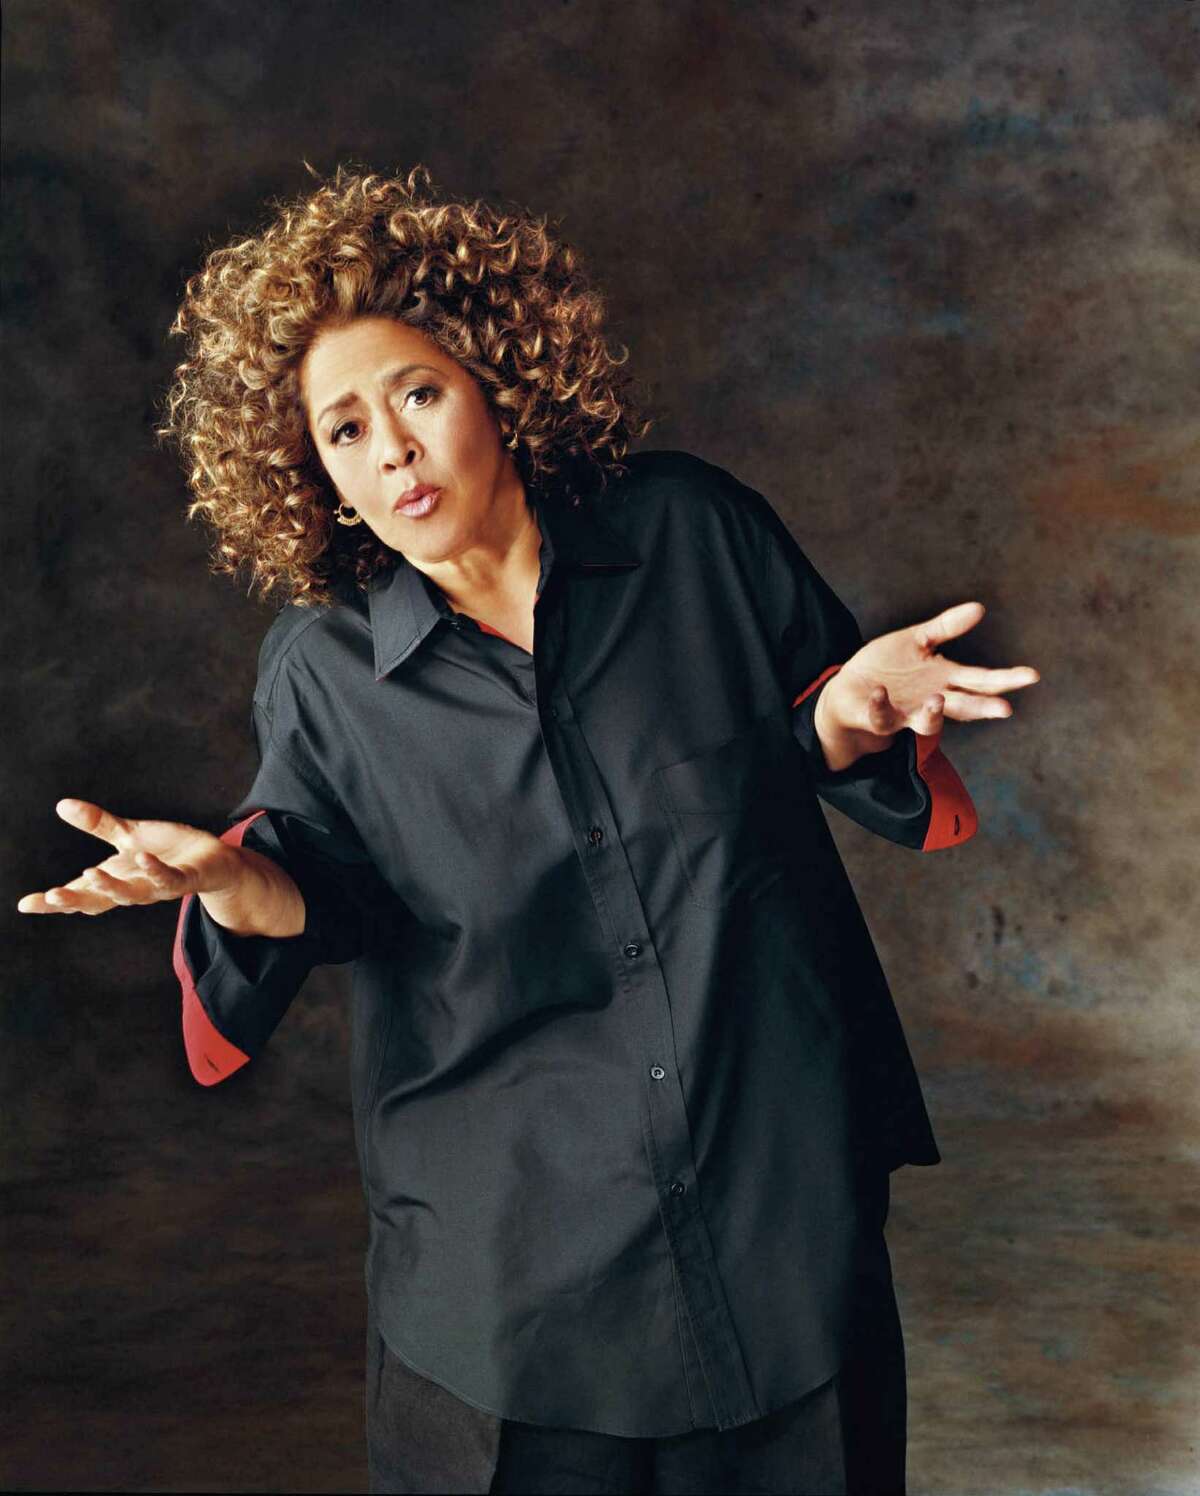 Actress Anna Deavere Smith will feature excerpts from her one-woman show, 'Let Me Down Easy' on Nov. 13 at Purchase College in Purchase, N.Y.